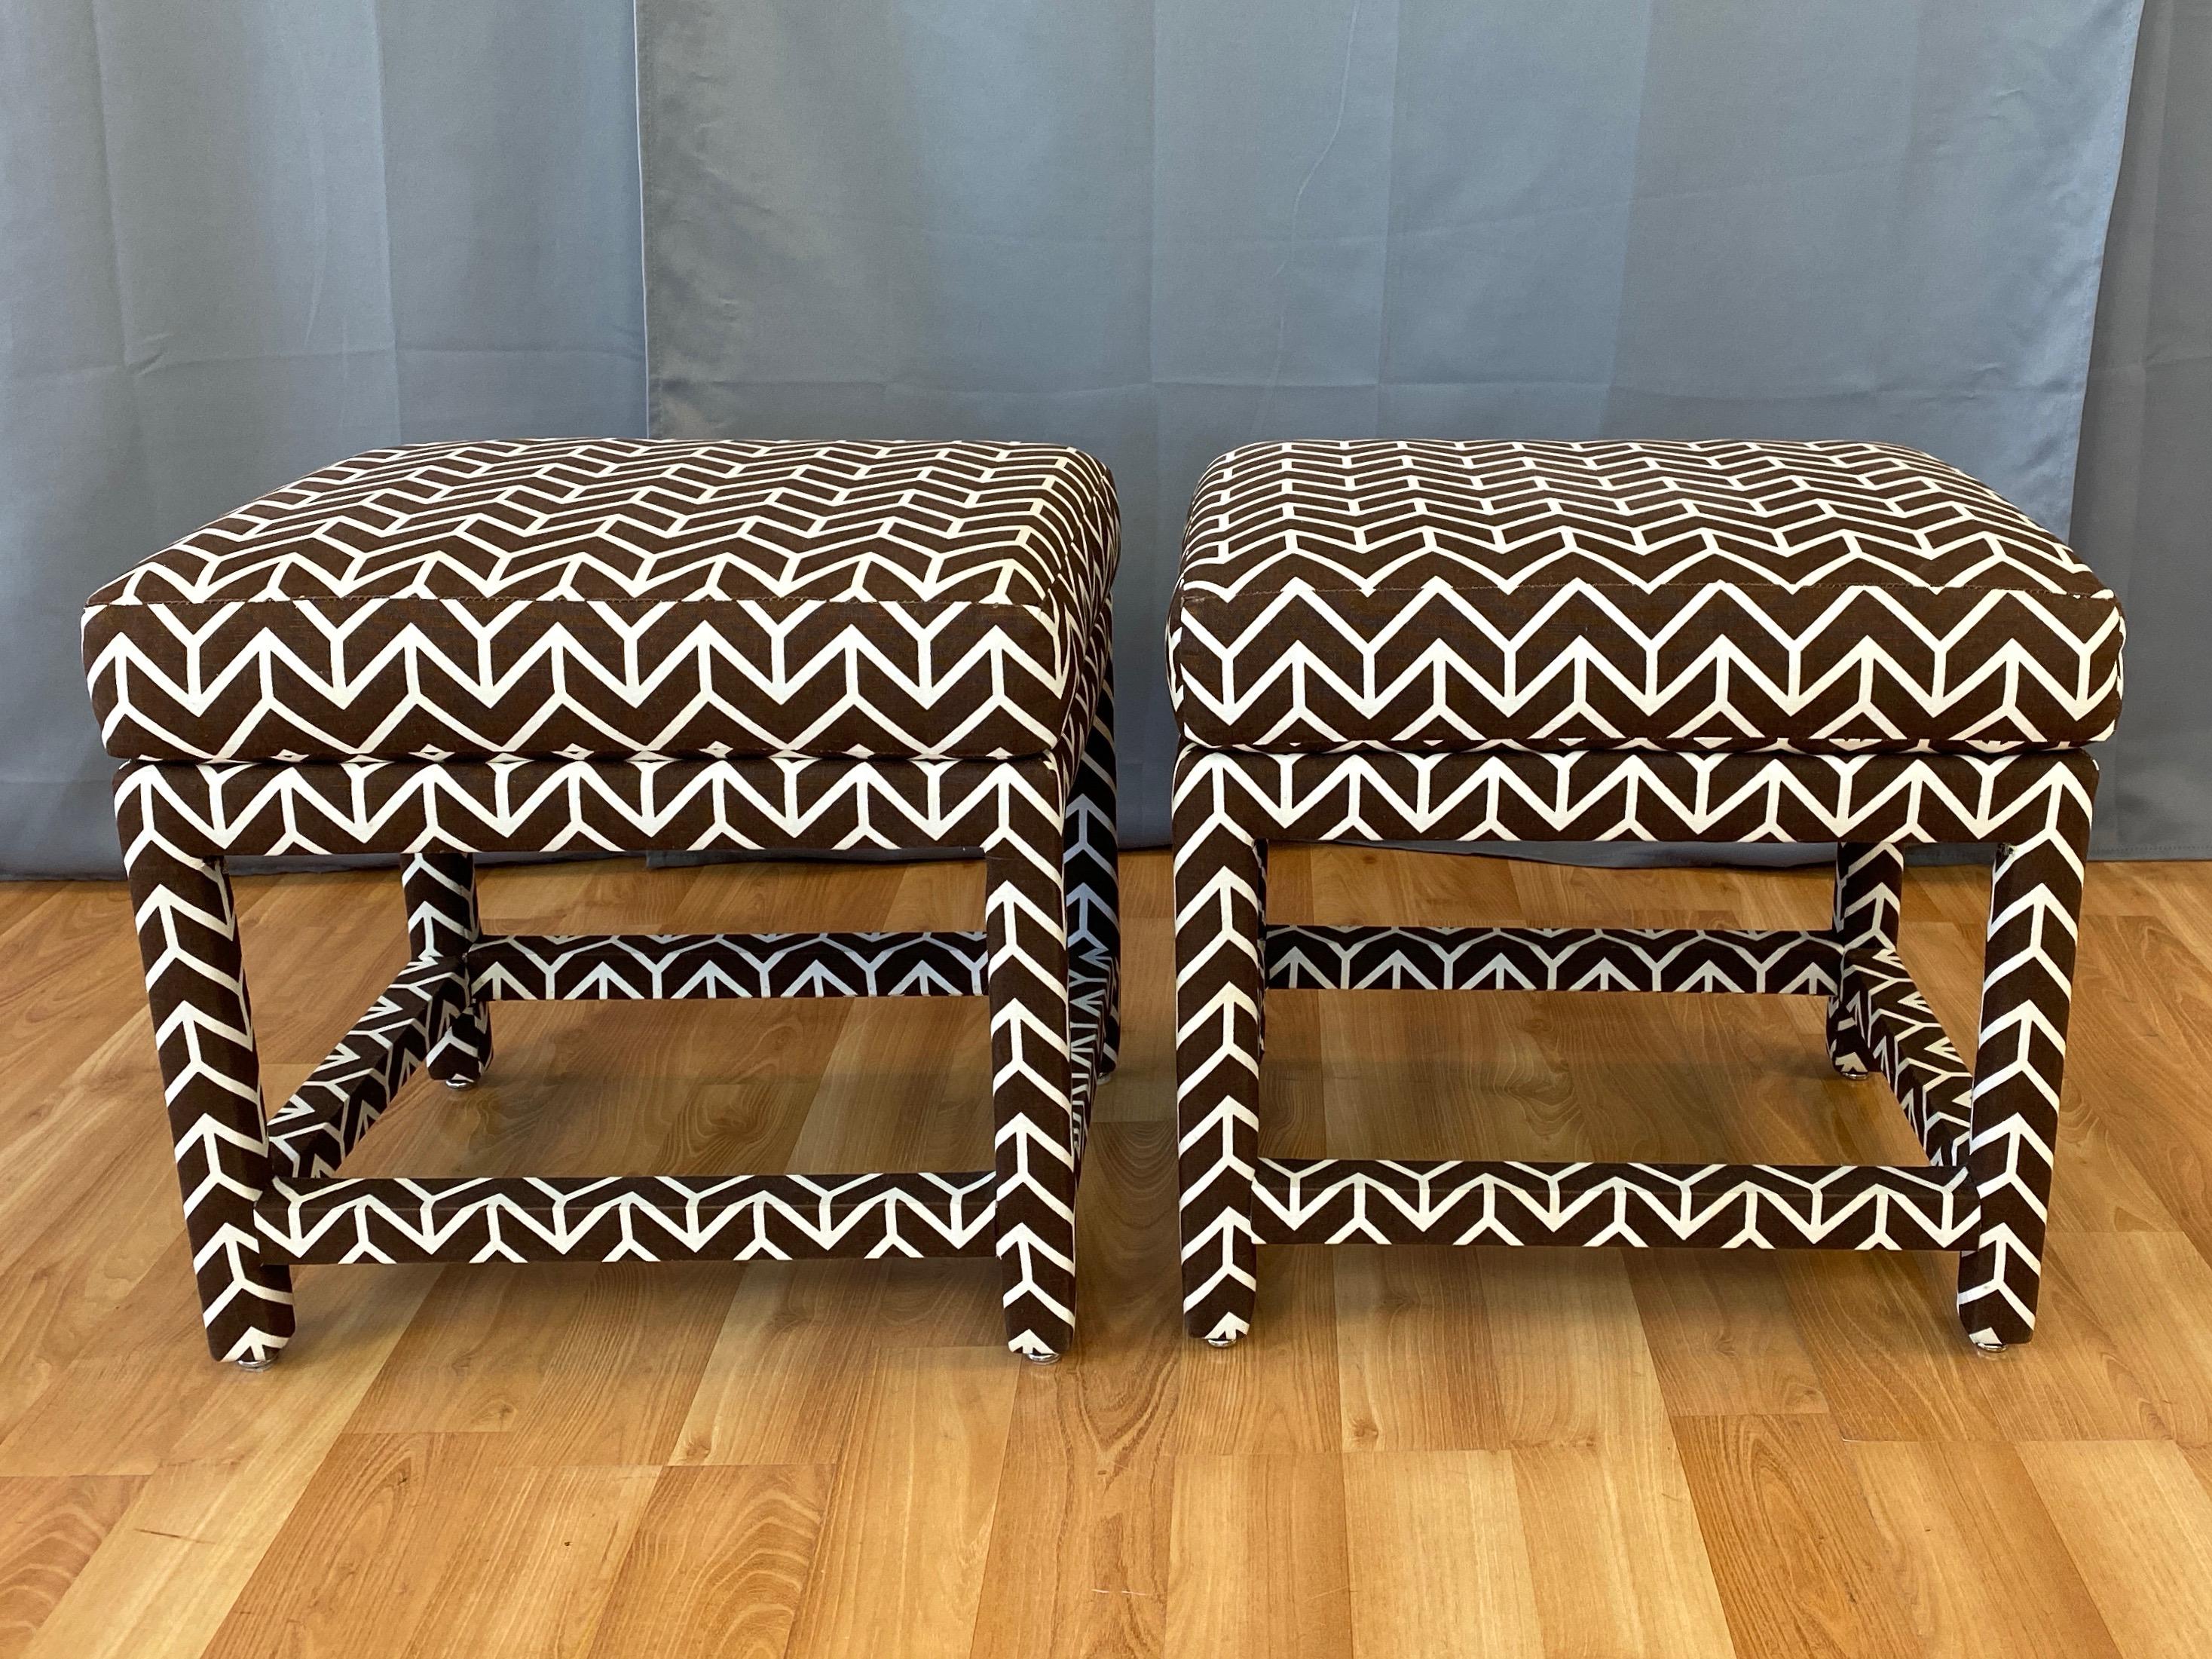 Mid-20th Century Pair of Milo Baughman for Thayer Coggin Ottomans with David Hicks Upholstery